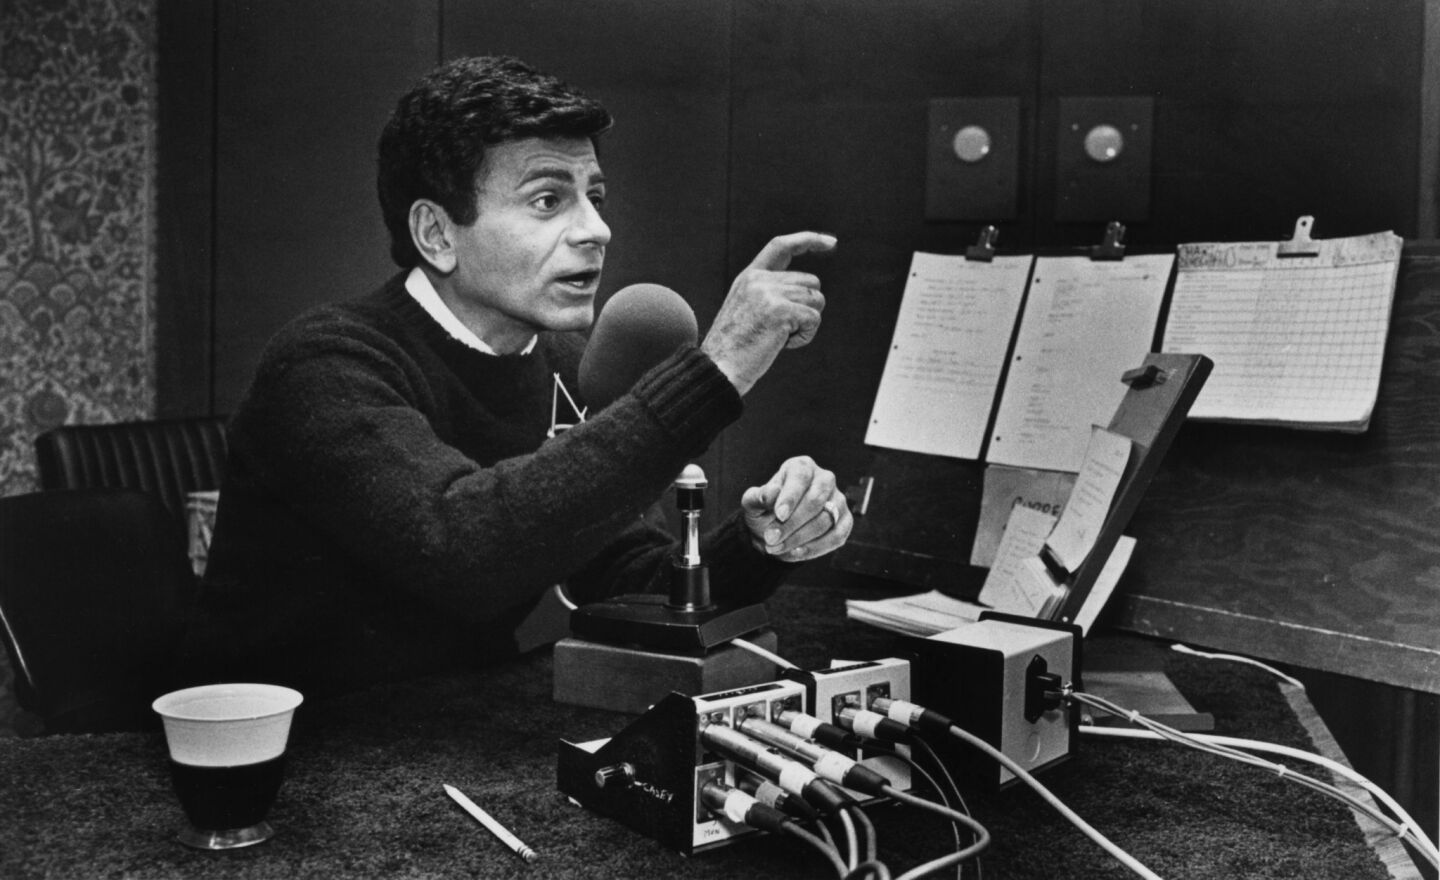 The Los Angeles-based disc jockey pioneered the nationally syndicated countdown-style radio show. His warm, distinctively husky tenor became one of the country's most instantly recognizable voices. He was 82.